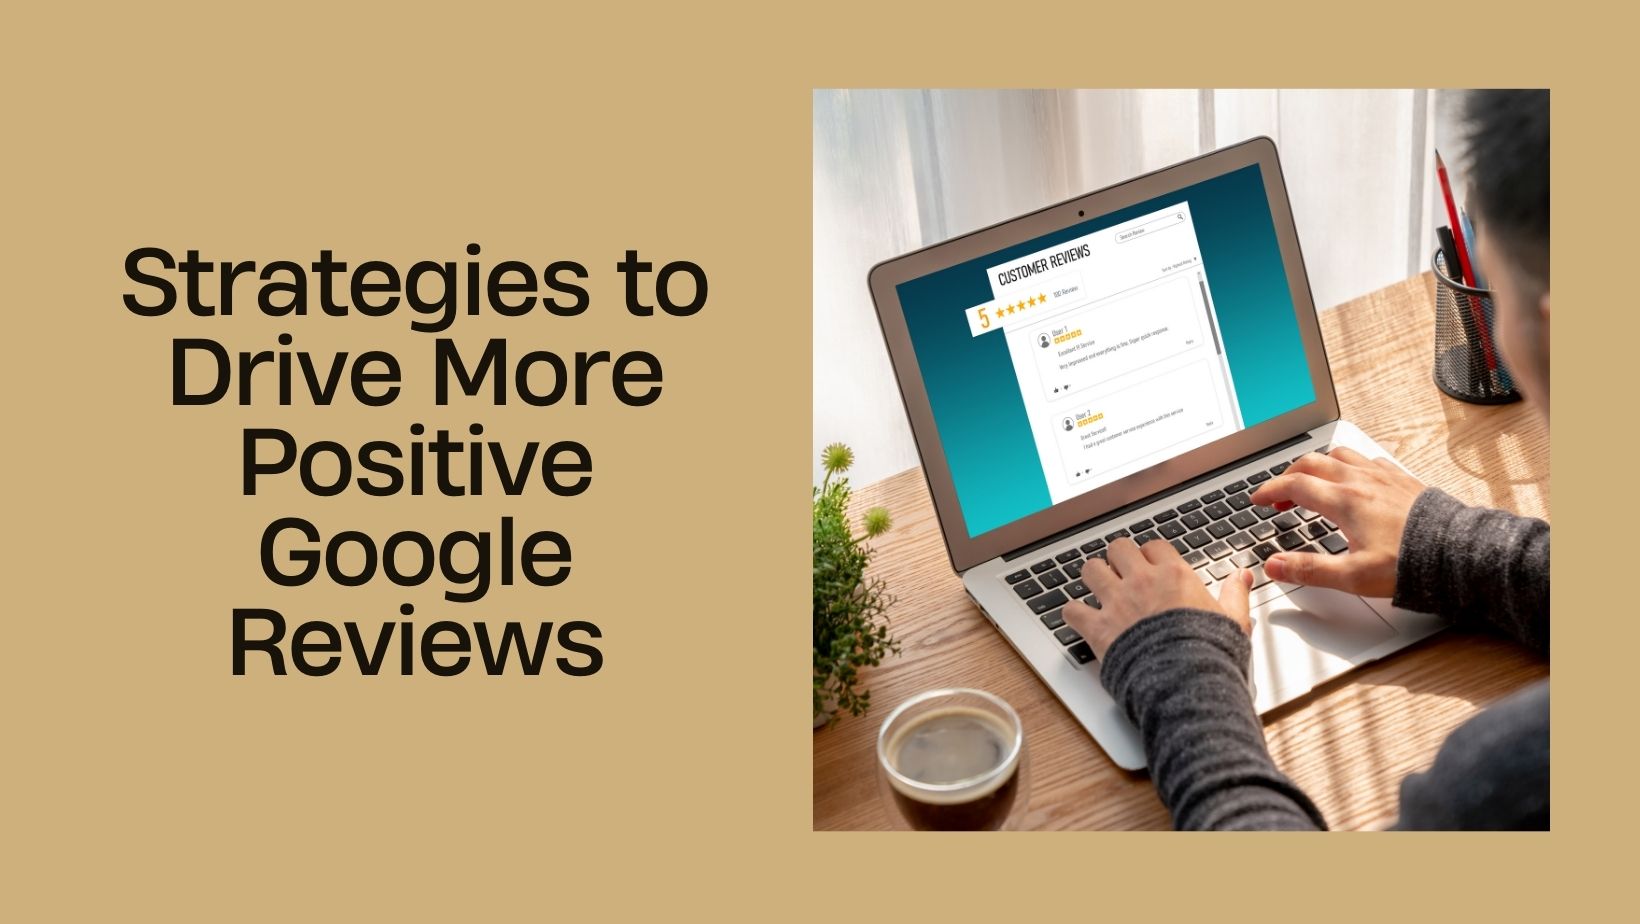 Strategies to Drive More Positive Google Reviews